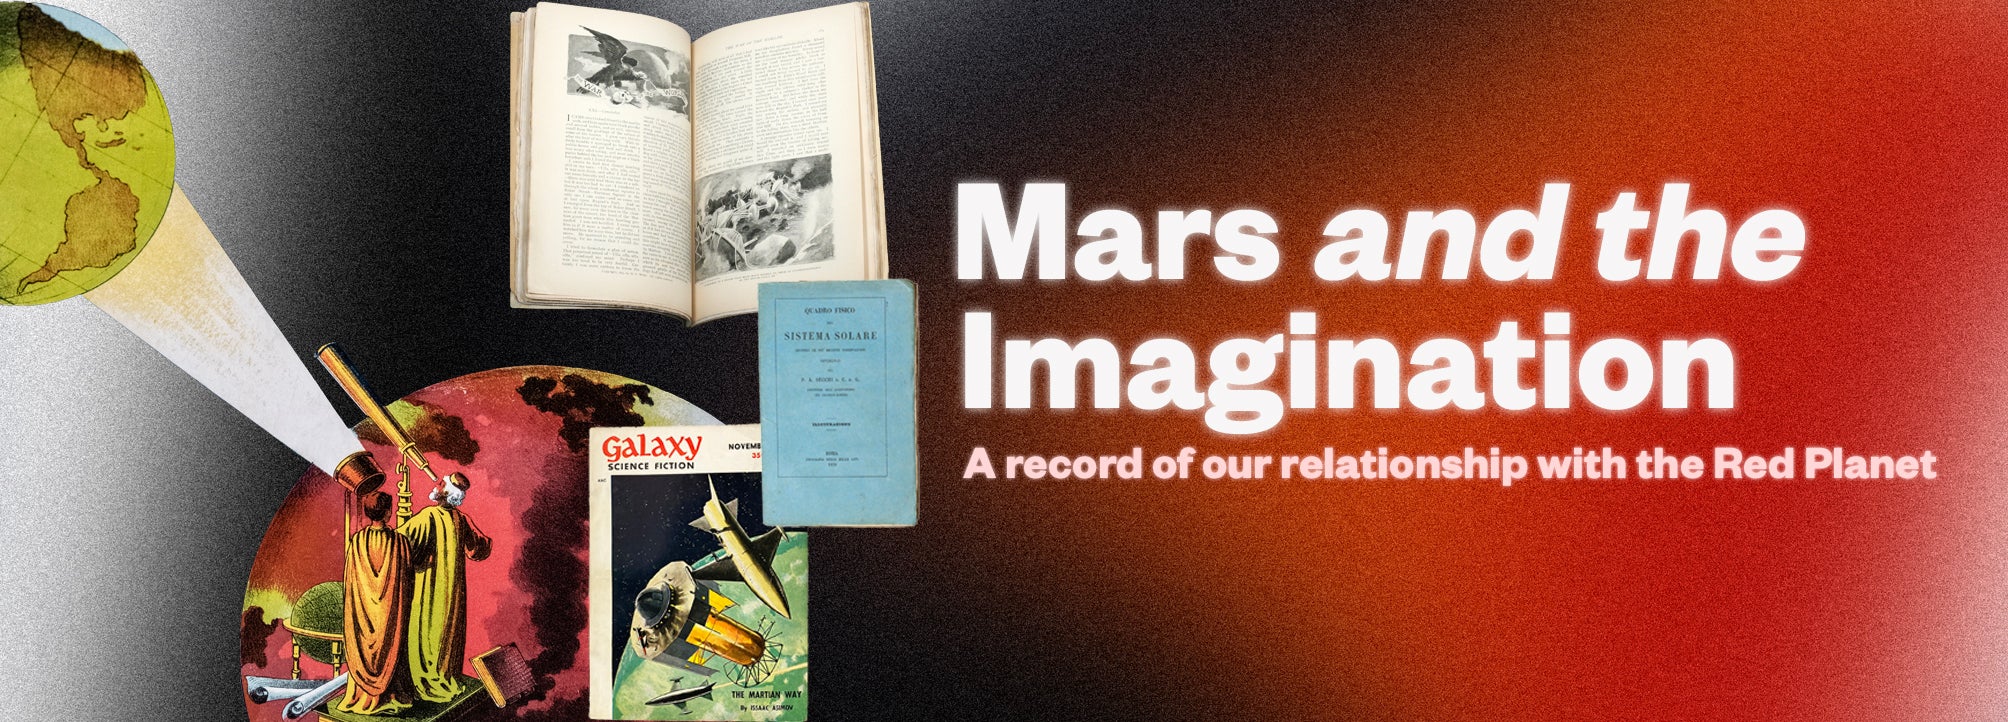 Mars and the Imagination